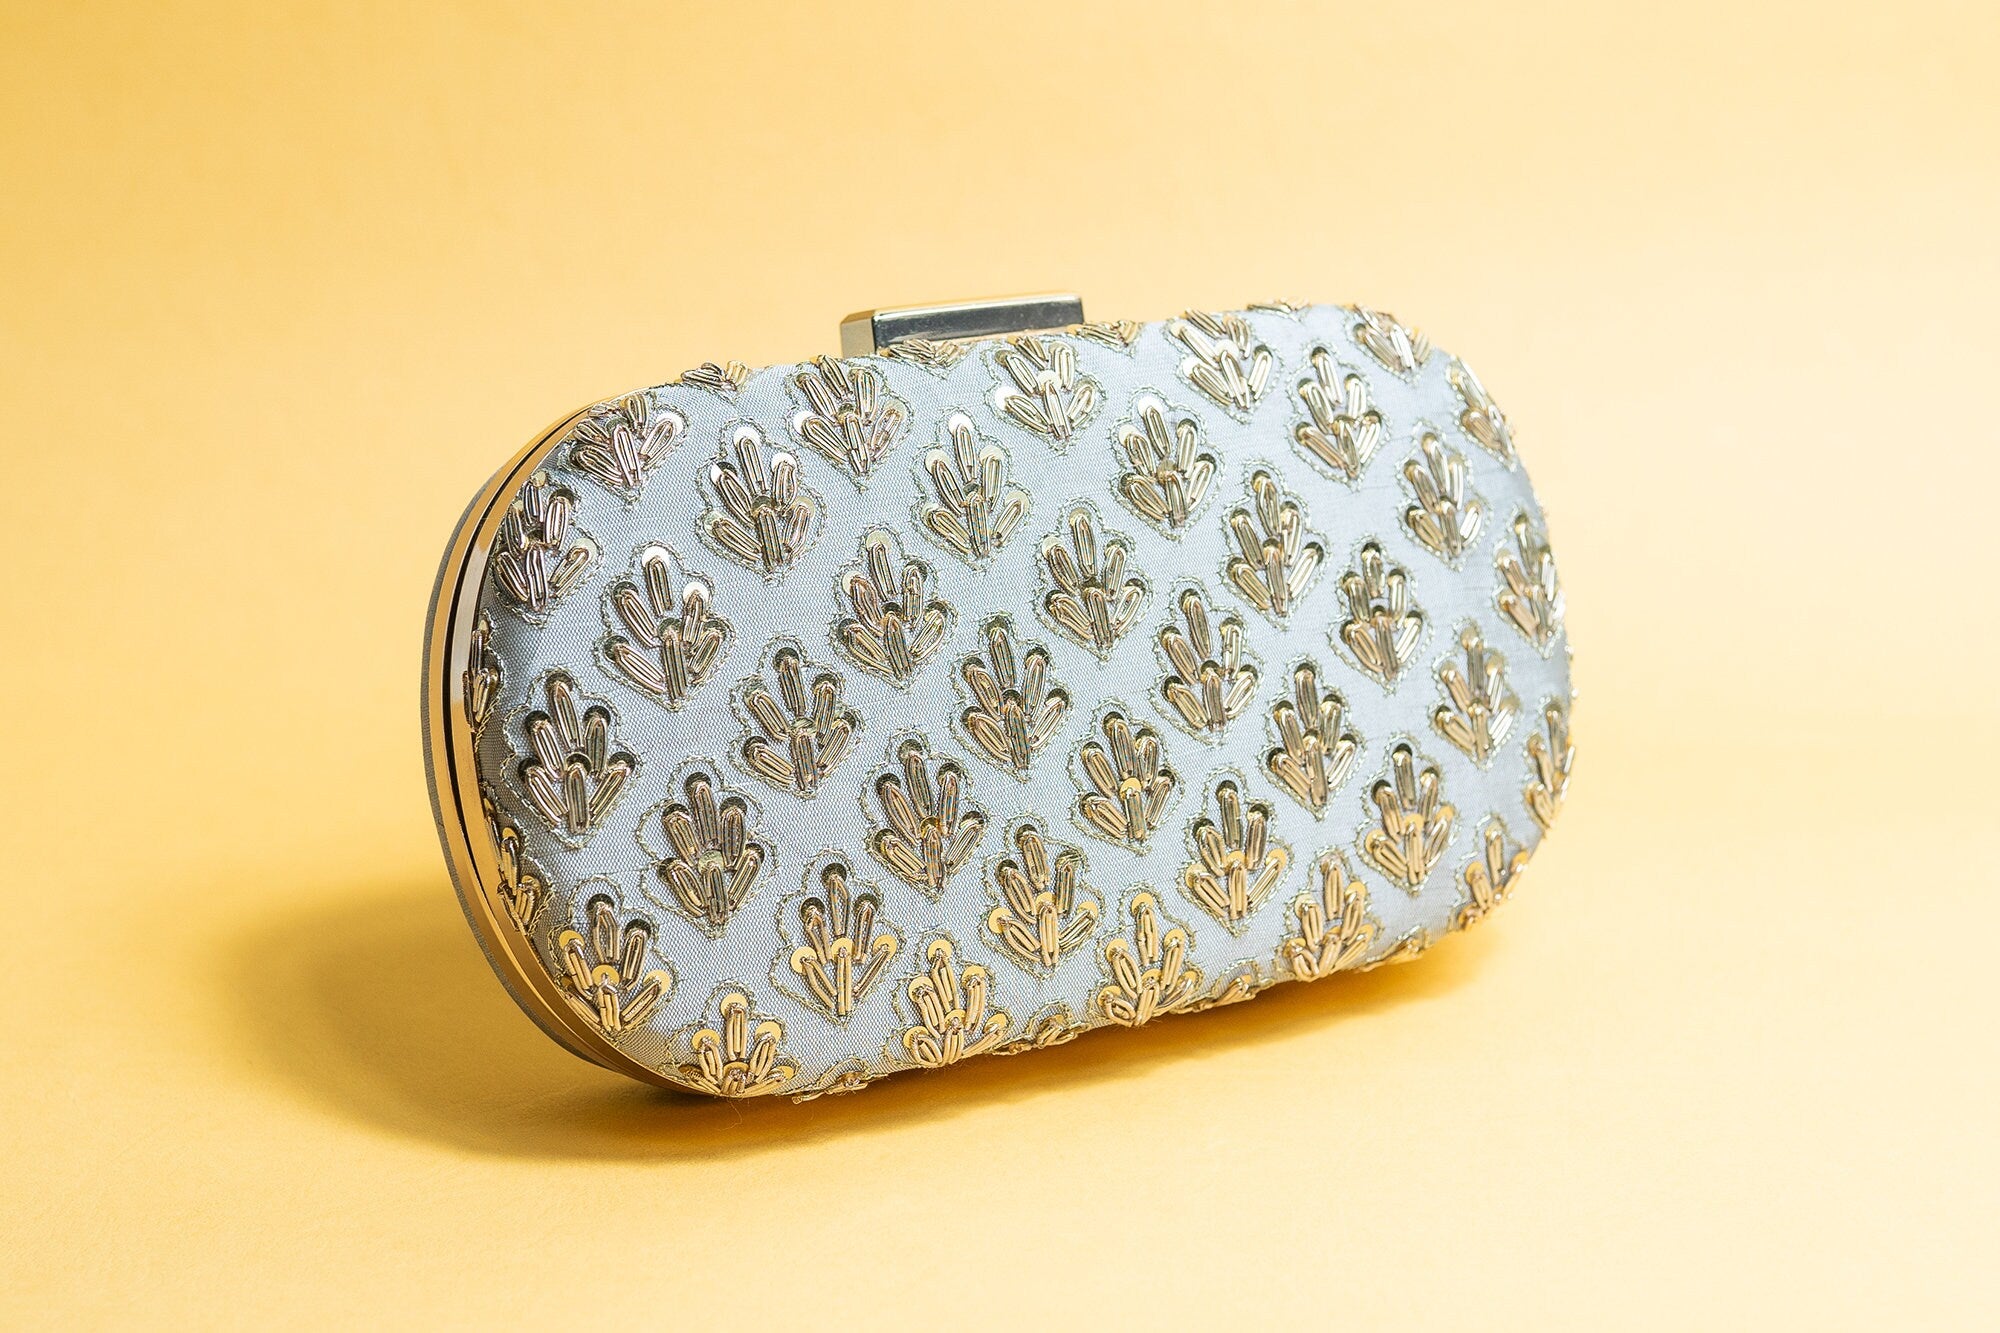 Gray metal embroidery clutch bag with detachable sling